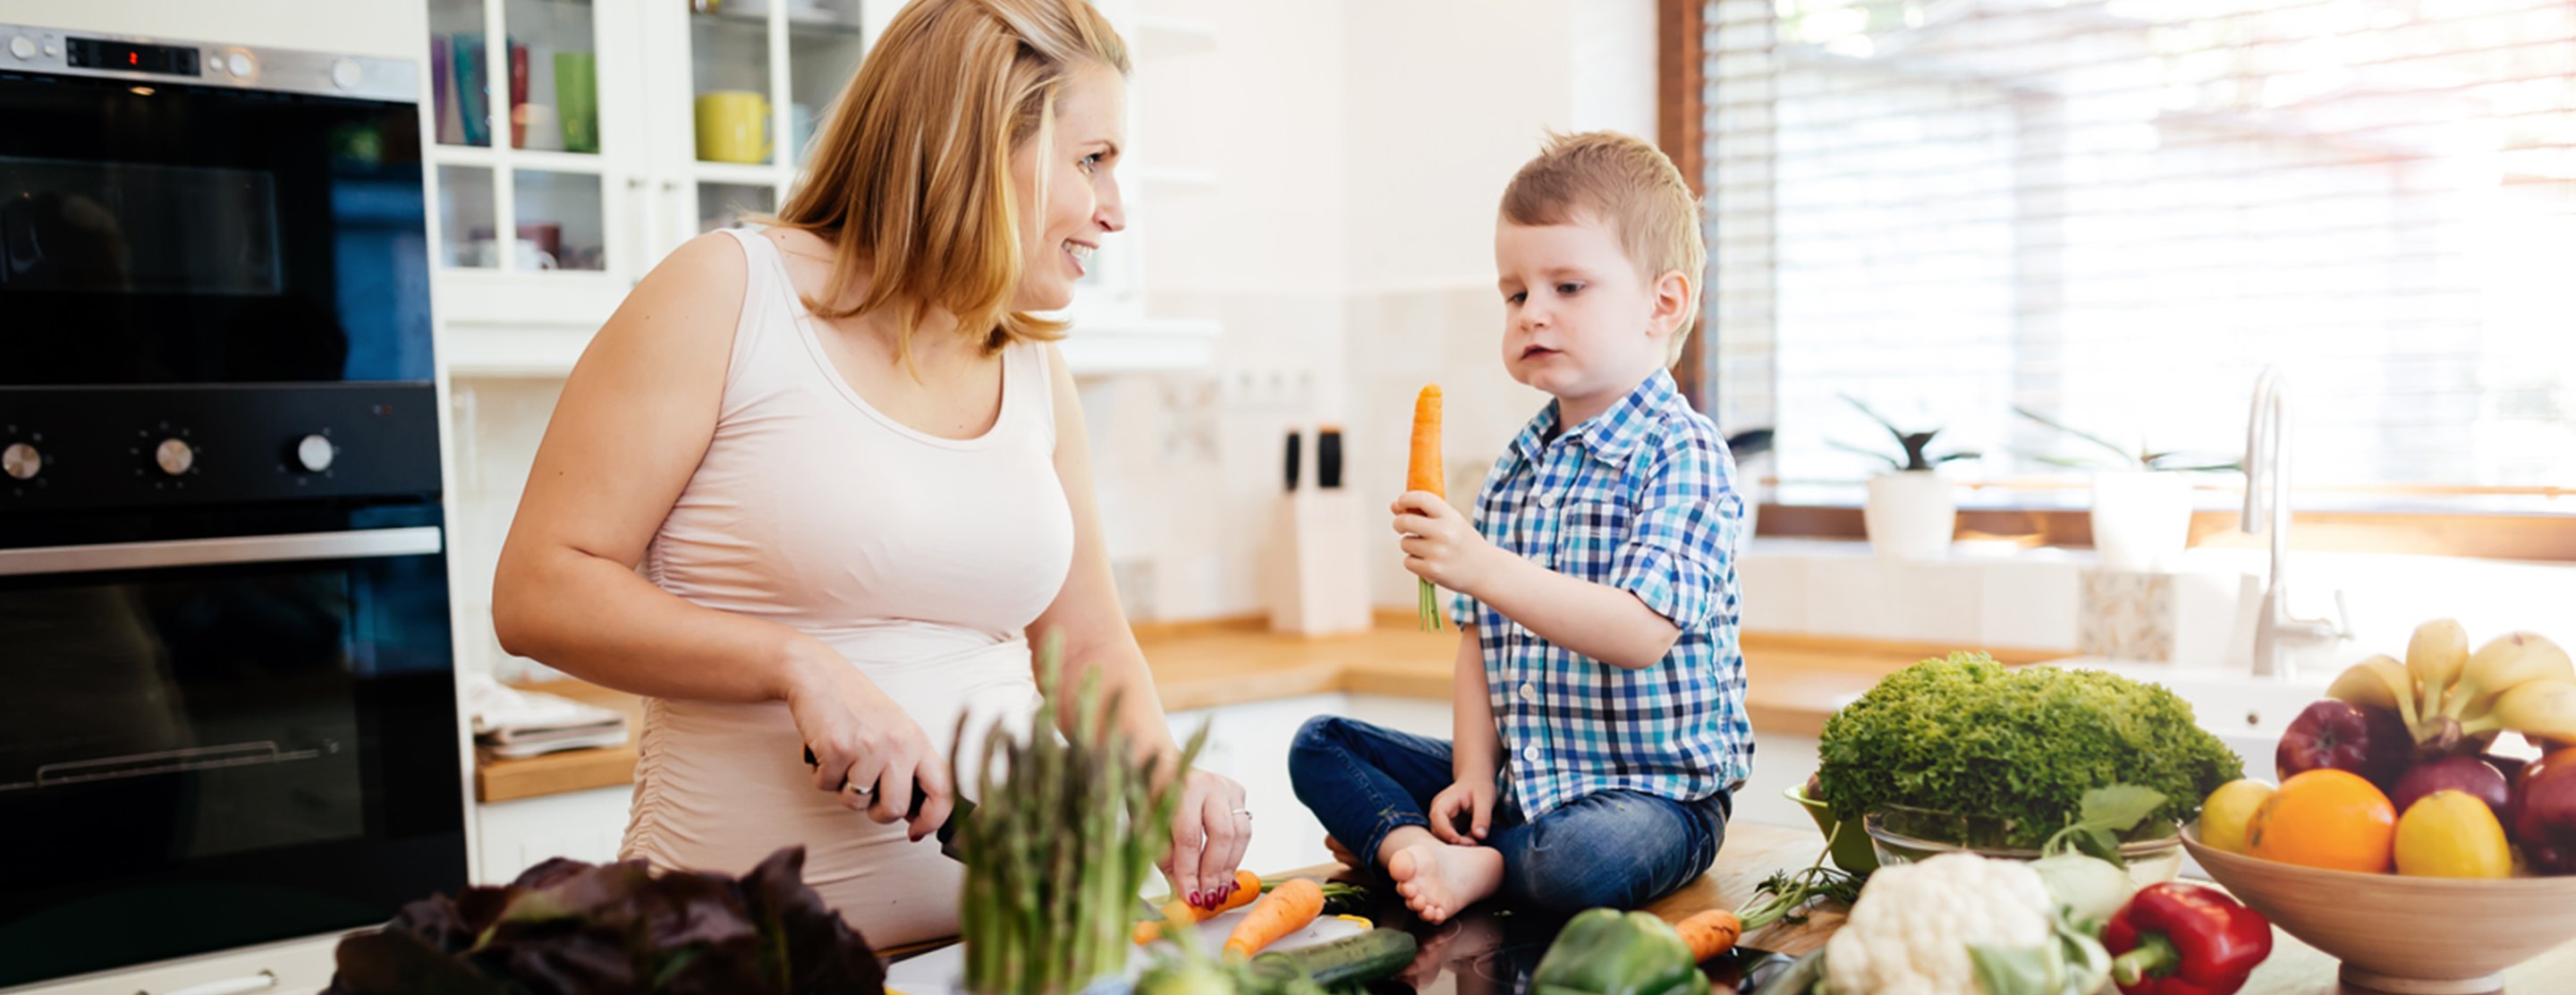 Dietary Recommendations for Gestational Diabetes